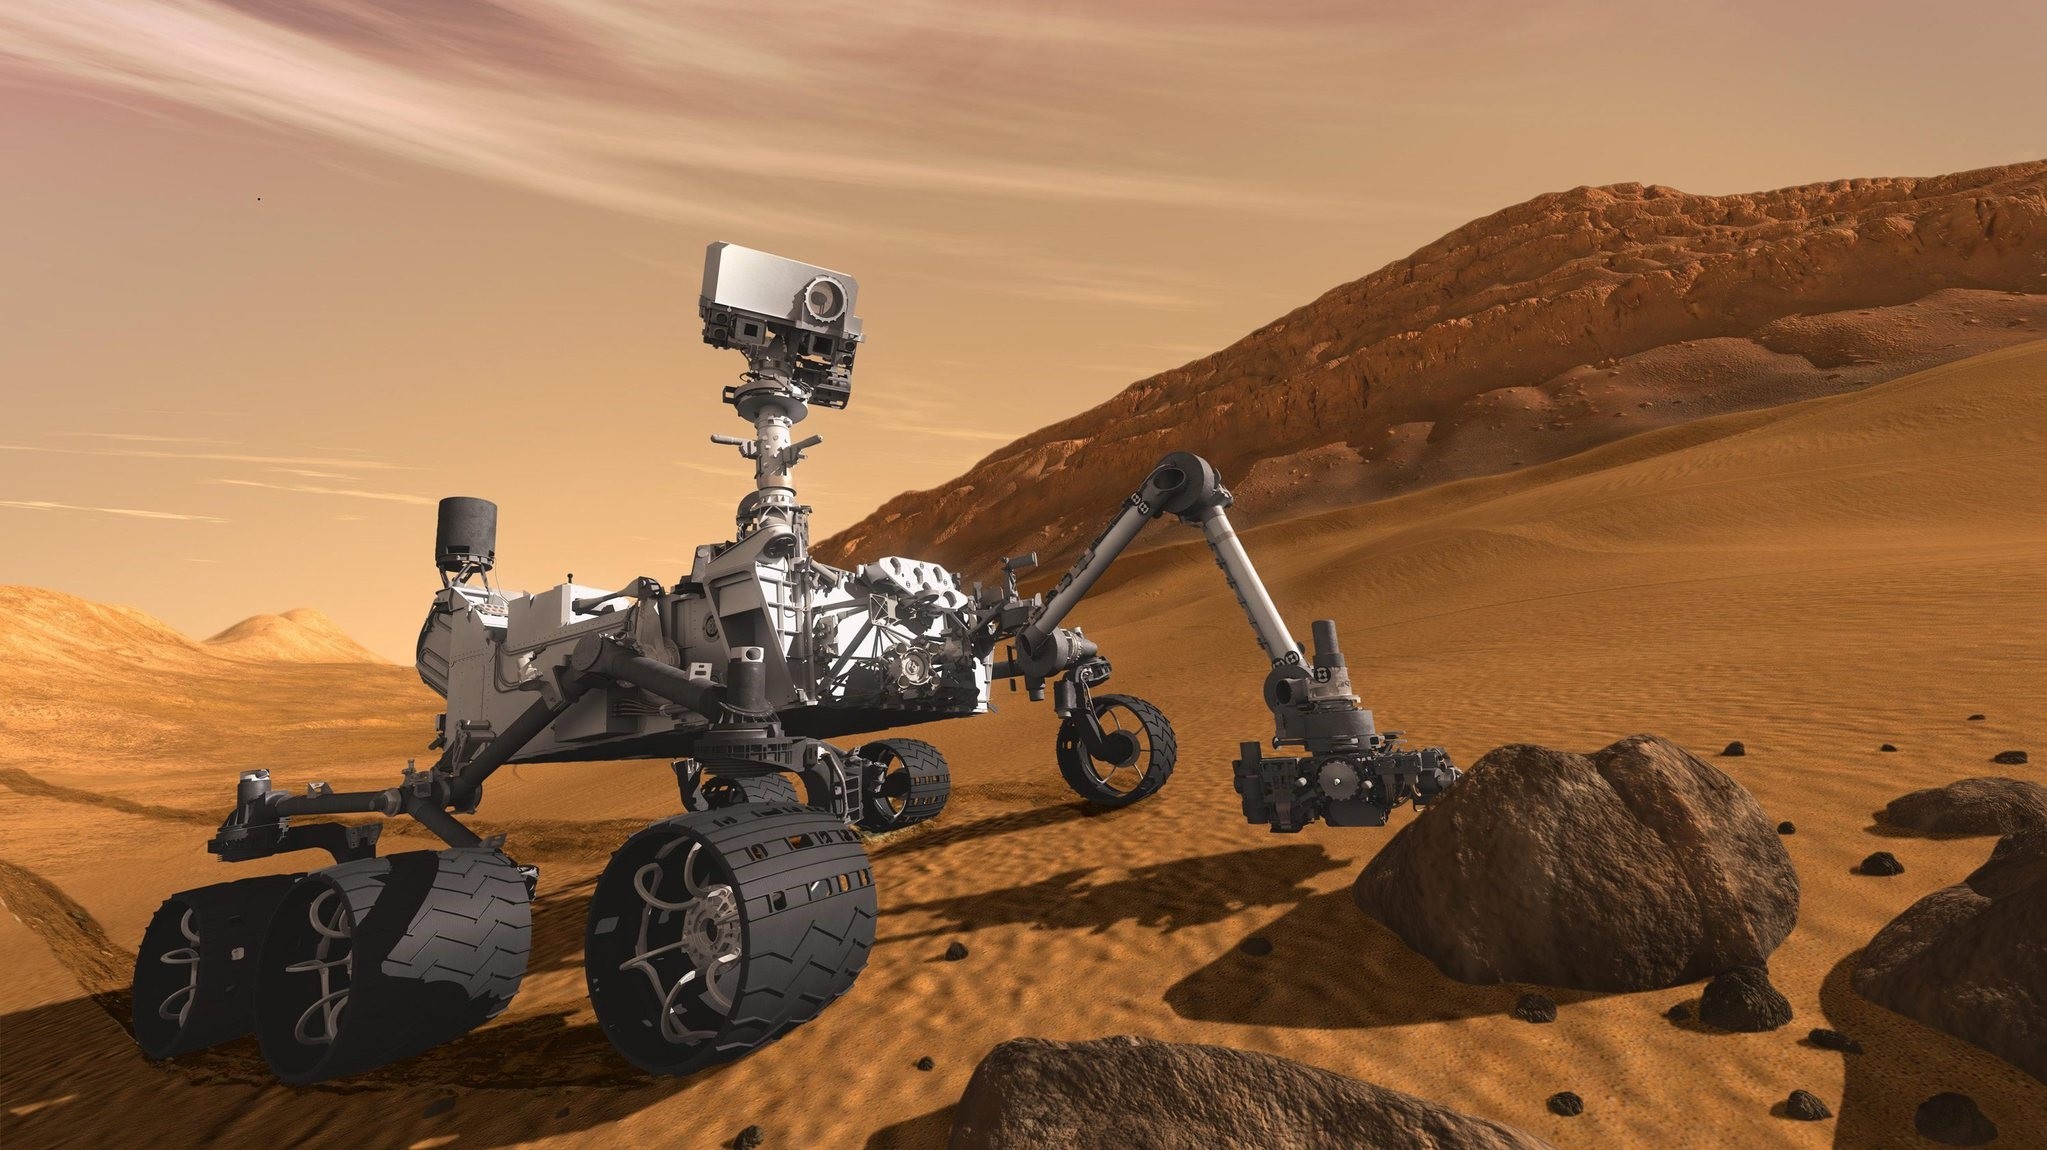 In this 2011 artist's rendering provided by NASA/JPL-Caltech, the Mars Science Laboratory Curiosity rover examines a rock on Mars with a set of tools at the end of its arm, which extends about 2 meters. (AP Photo)